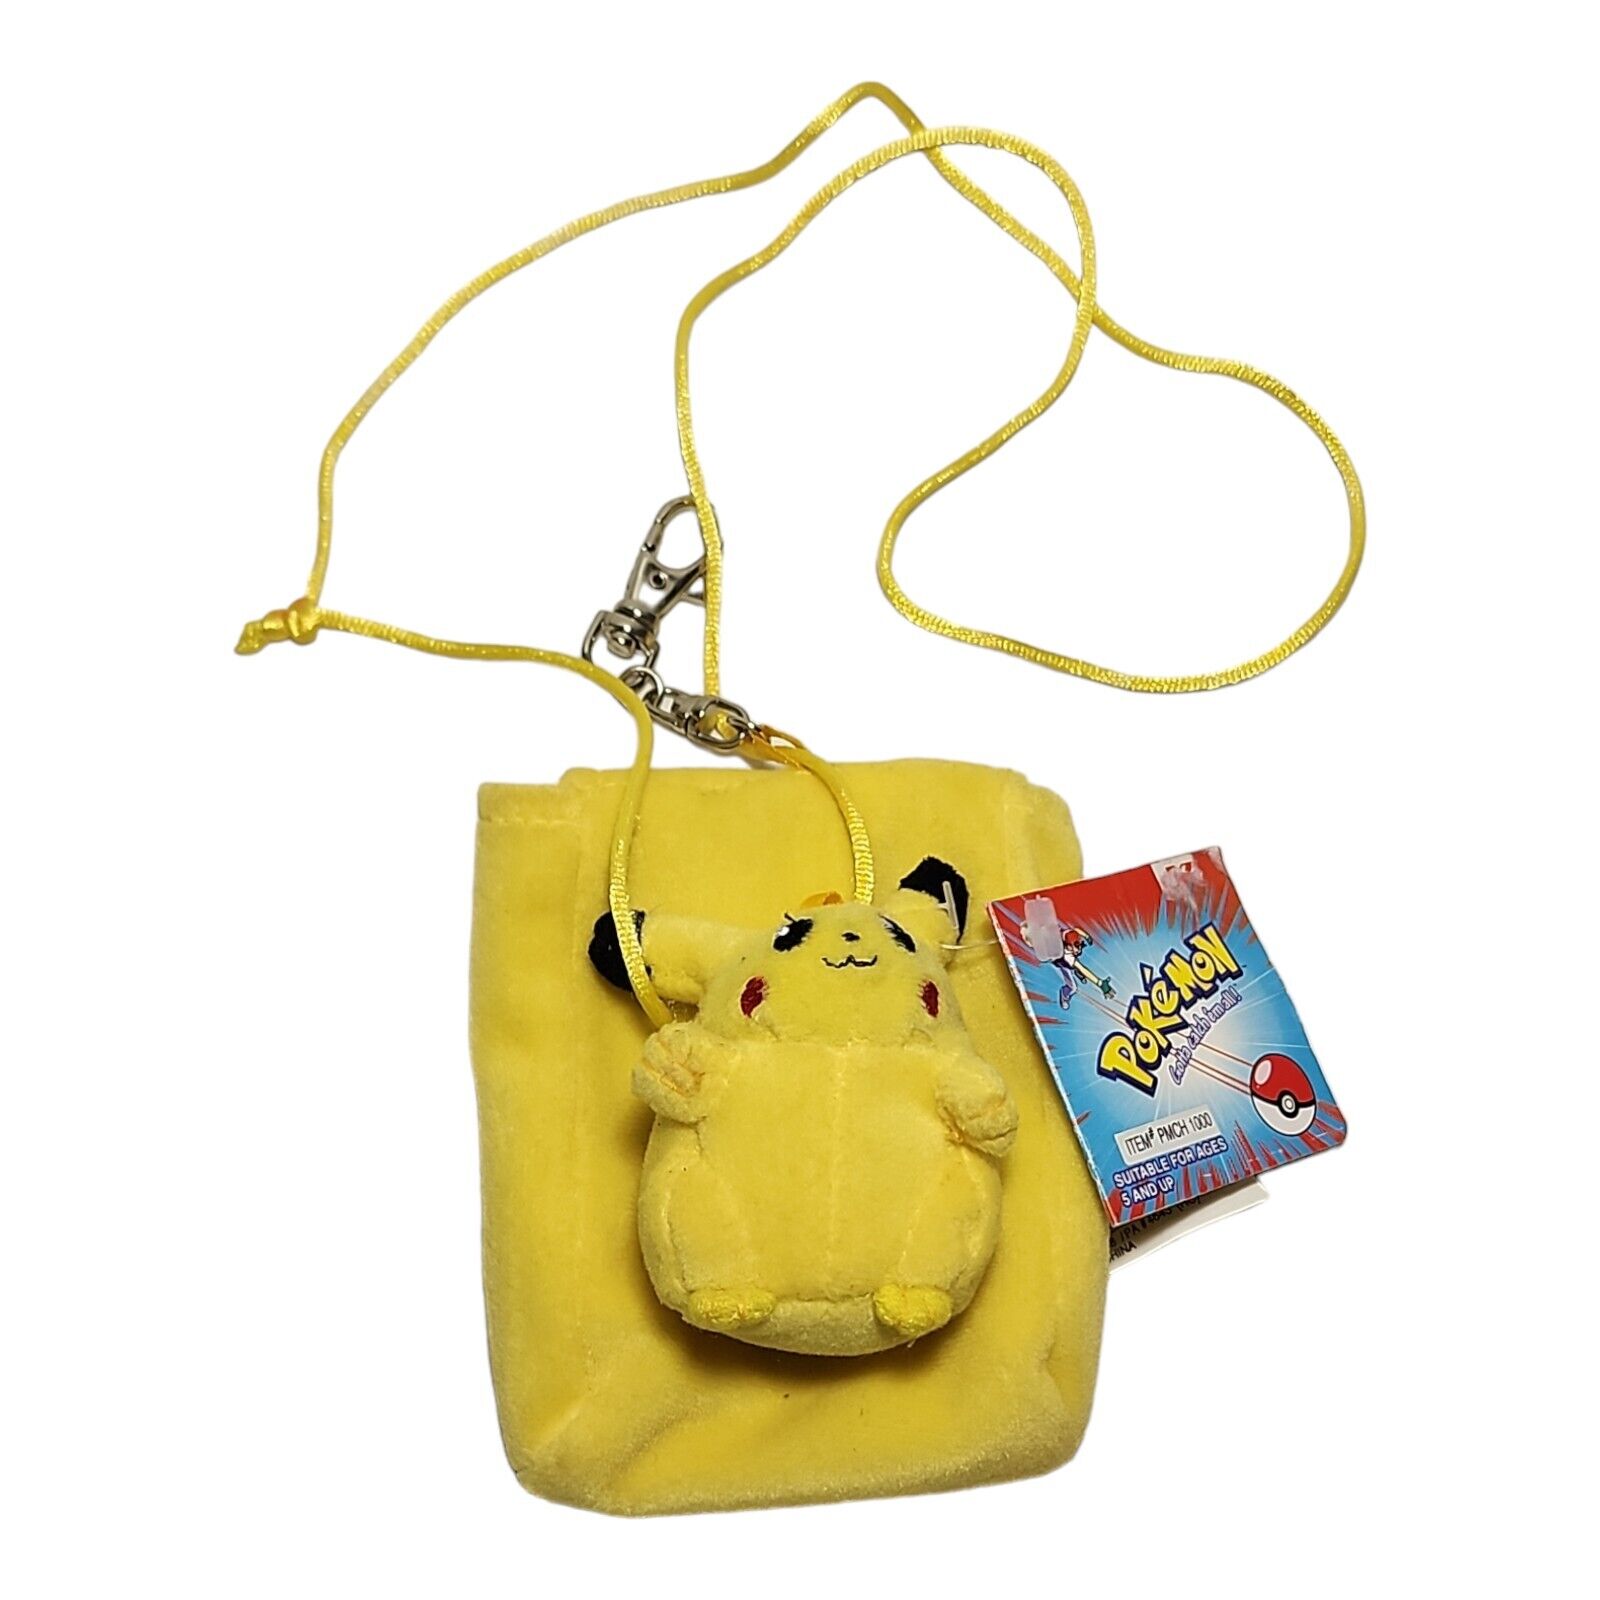 Vintage 1990s Pokemon Pikachu Plush Wallet Pouch With Laynard And Tag